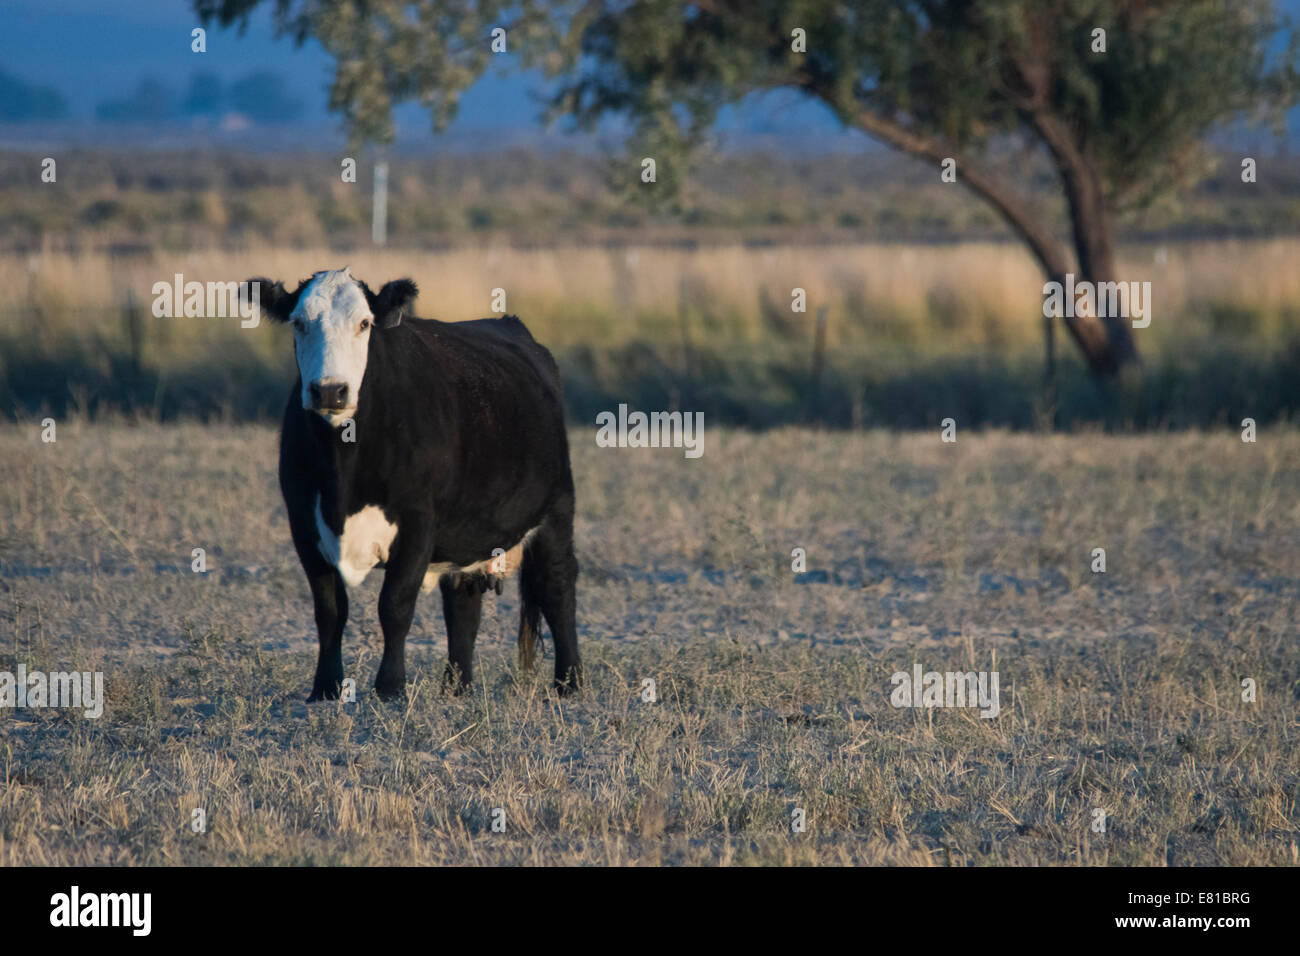 Bald faced beef cow in a field. Stock Photo